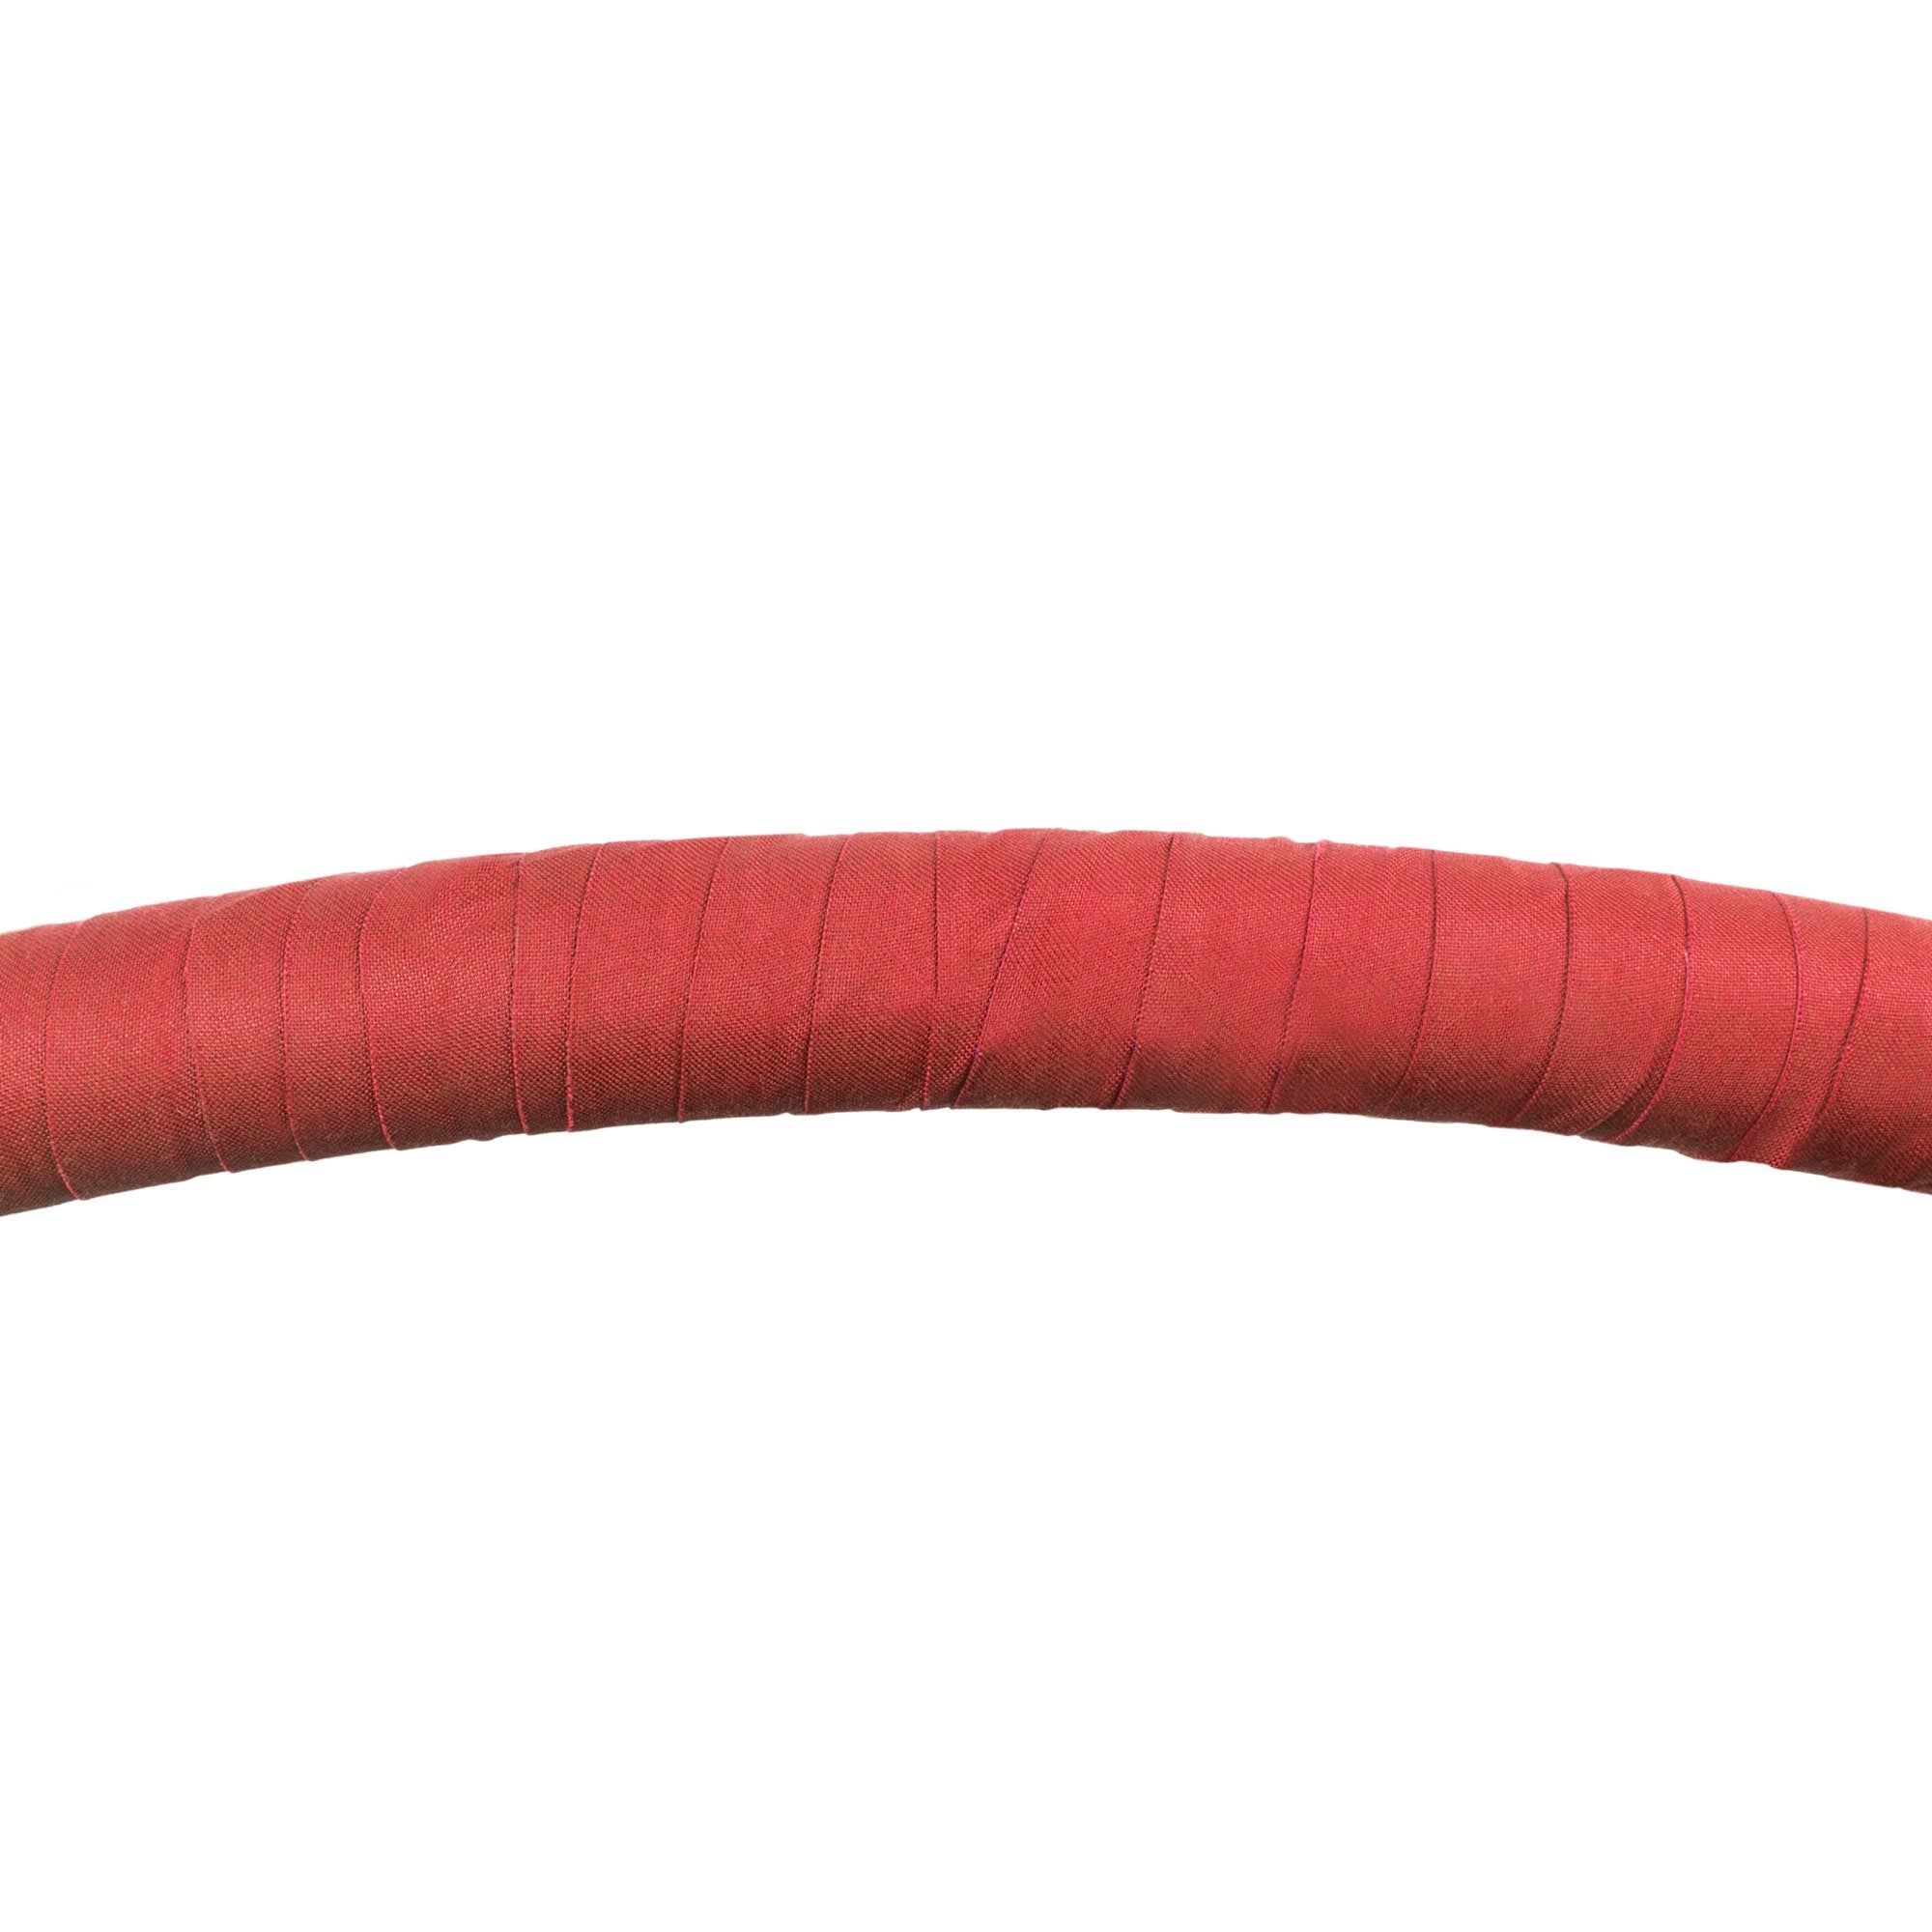 hoop taped with red 3.8cm